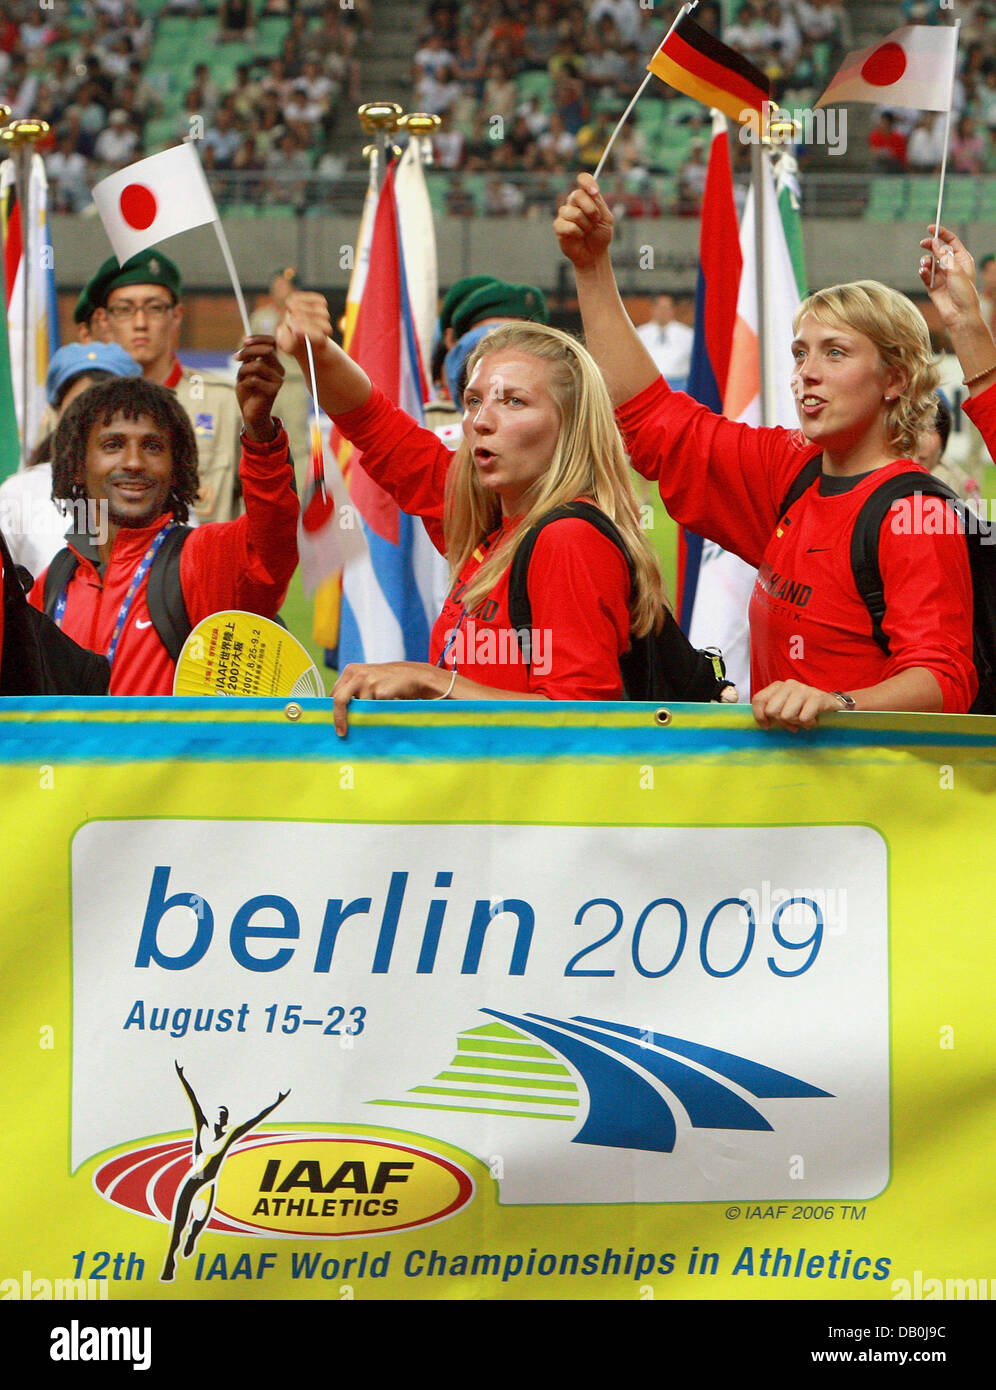 German athletes (L-R) Filmon Ghirmal, Lilli Schwarzkopf and Christina Obergfoell  pose with a banner displaying the logo of Berlin 2009 during the closing ceremony of the 11th IAAF World Championships in Athletics at Nagai stadium of Osaka, Japan, 02 September 2007. The IAAF flag was passed on to the city of Berlin hosting the 12th IAAF World Championships in Athletics in 2009. Pho Stock Photo